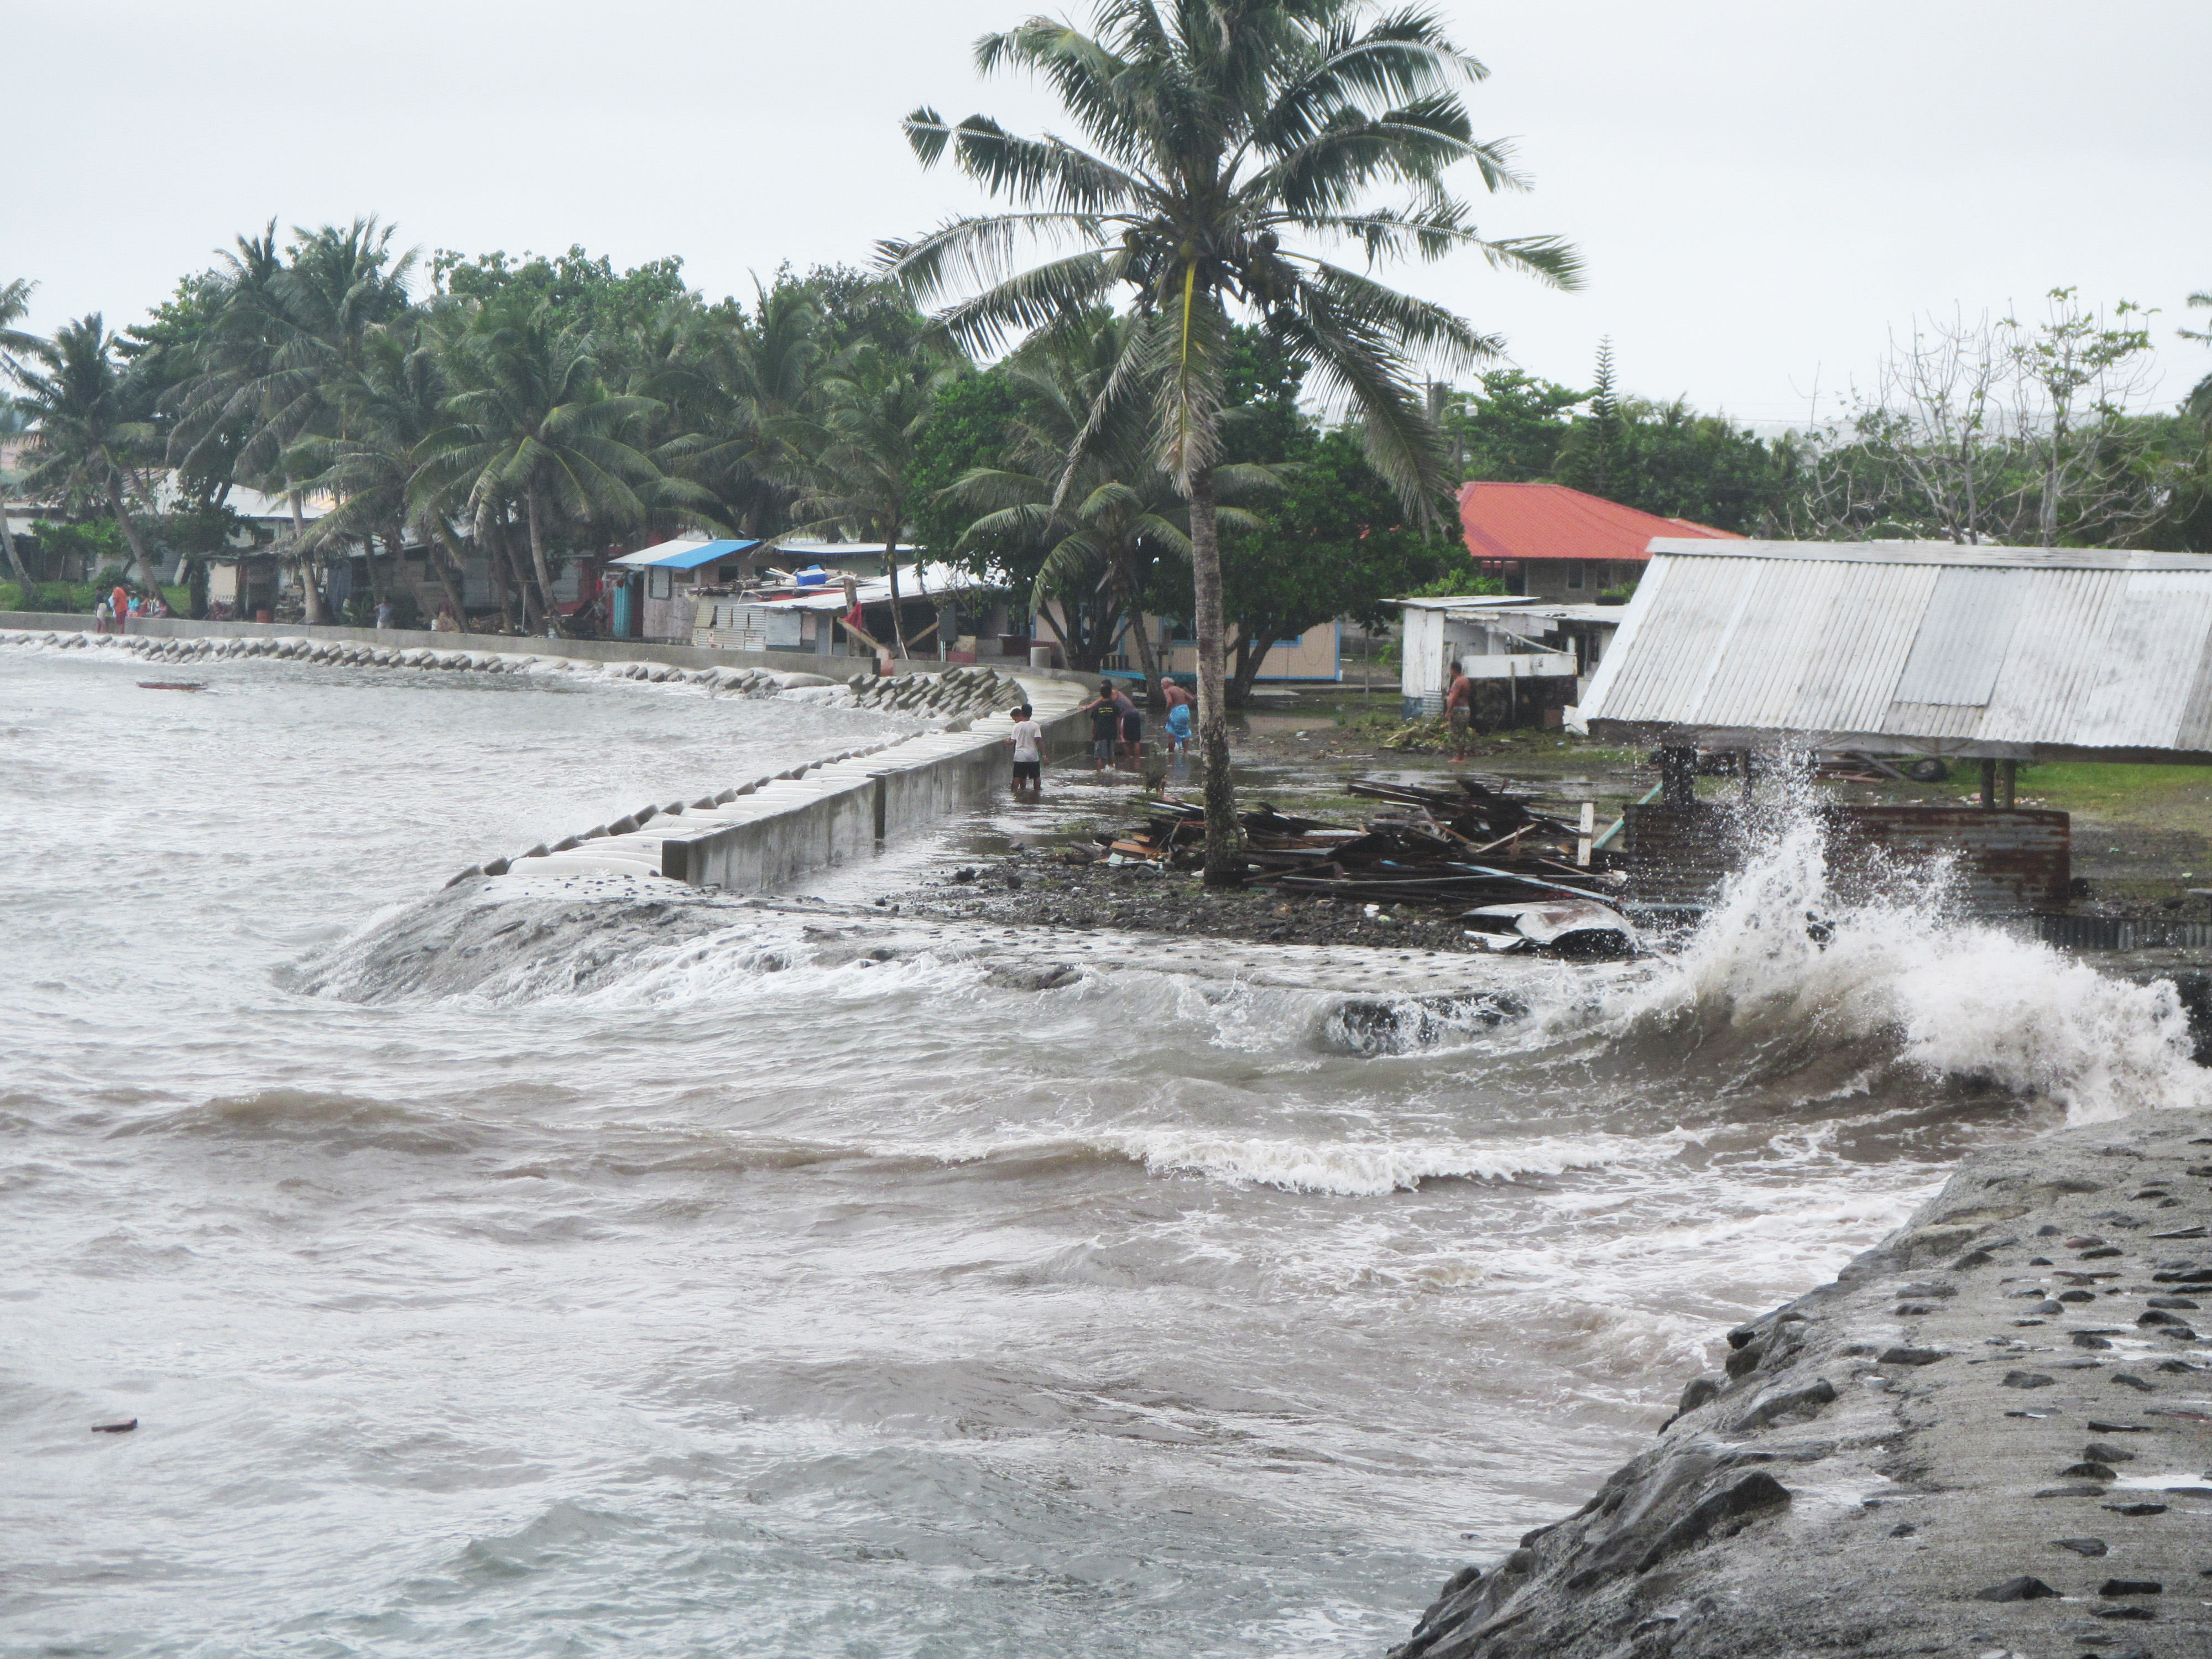 hurricanes bring high water and large waves to American Samoa.